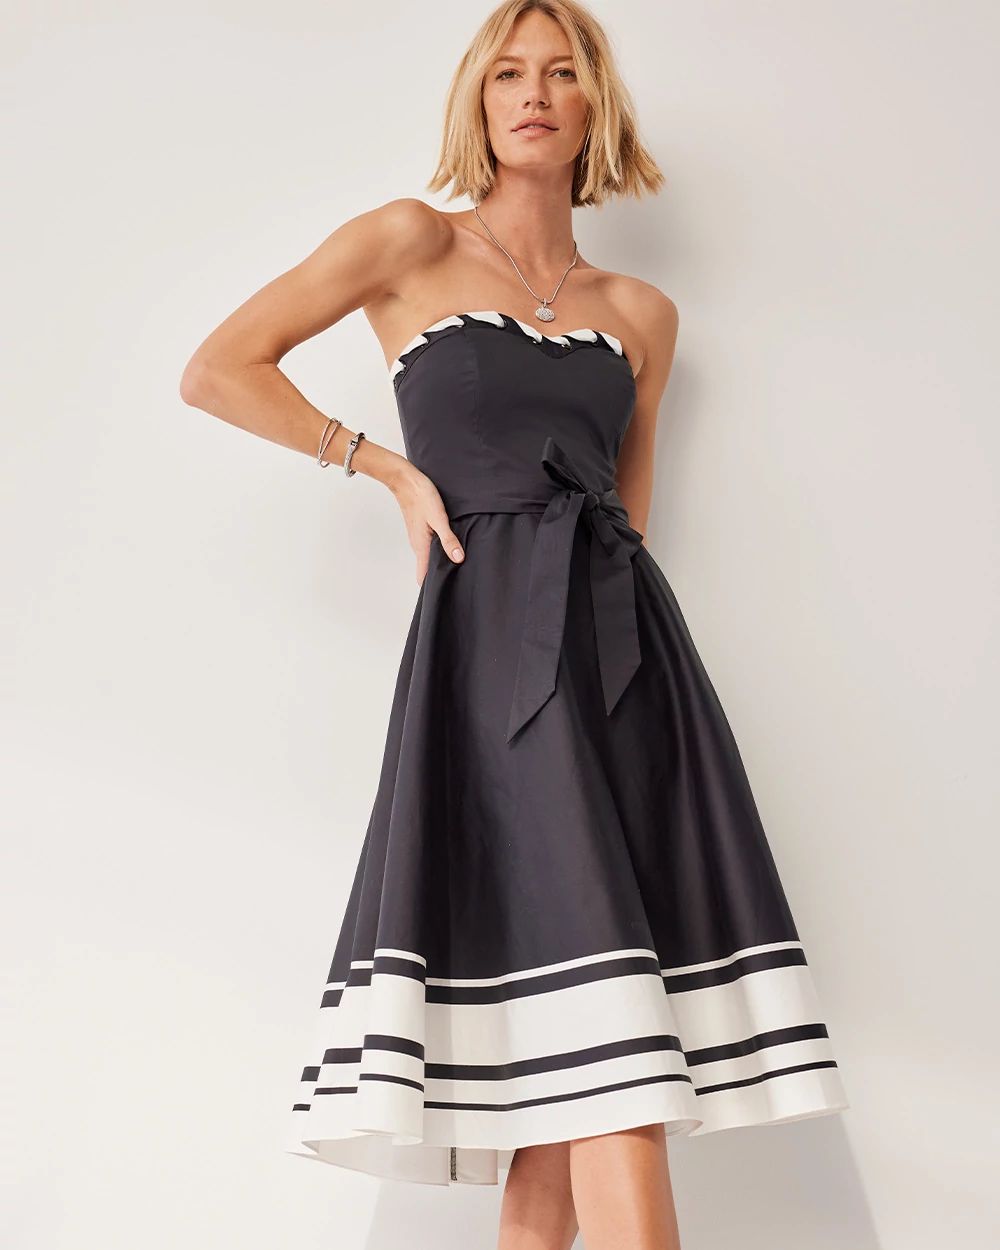 Strapless Sweetheart Fit-N-Flare Dress